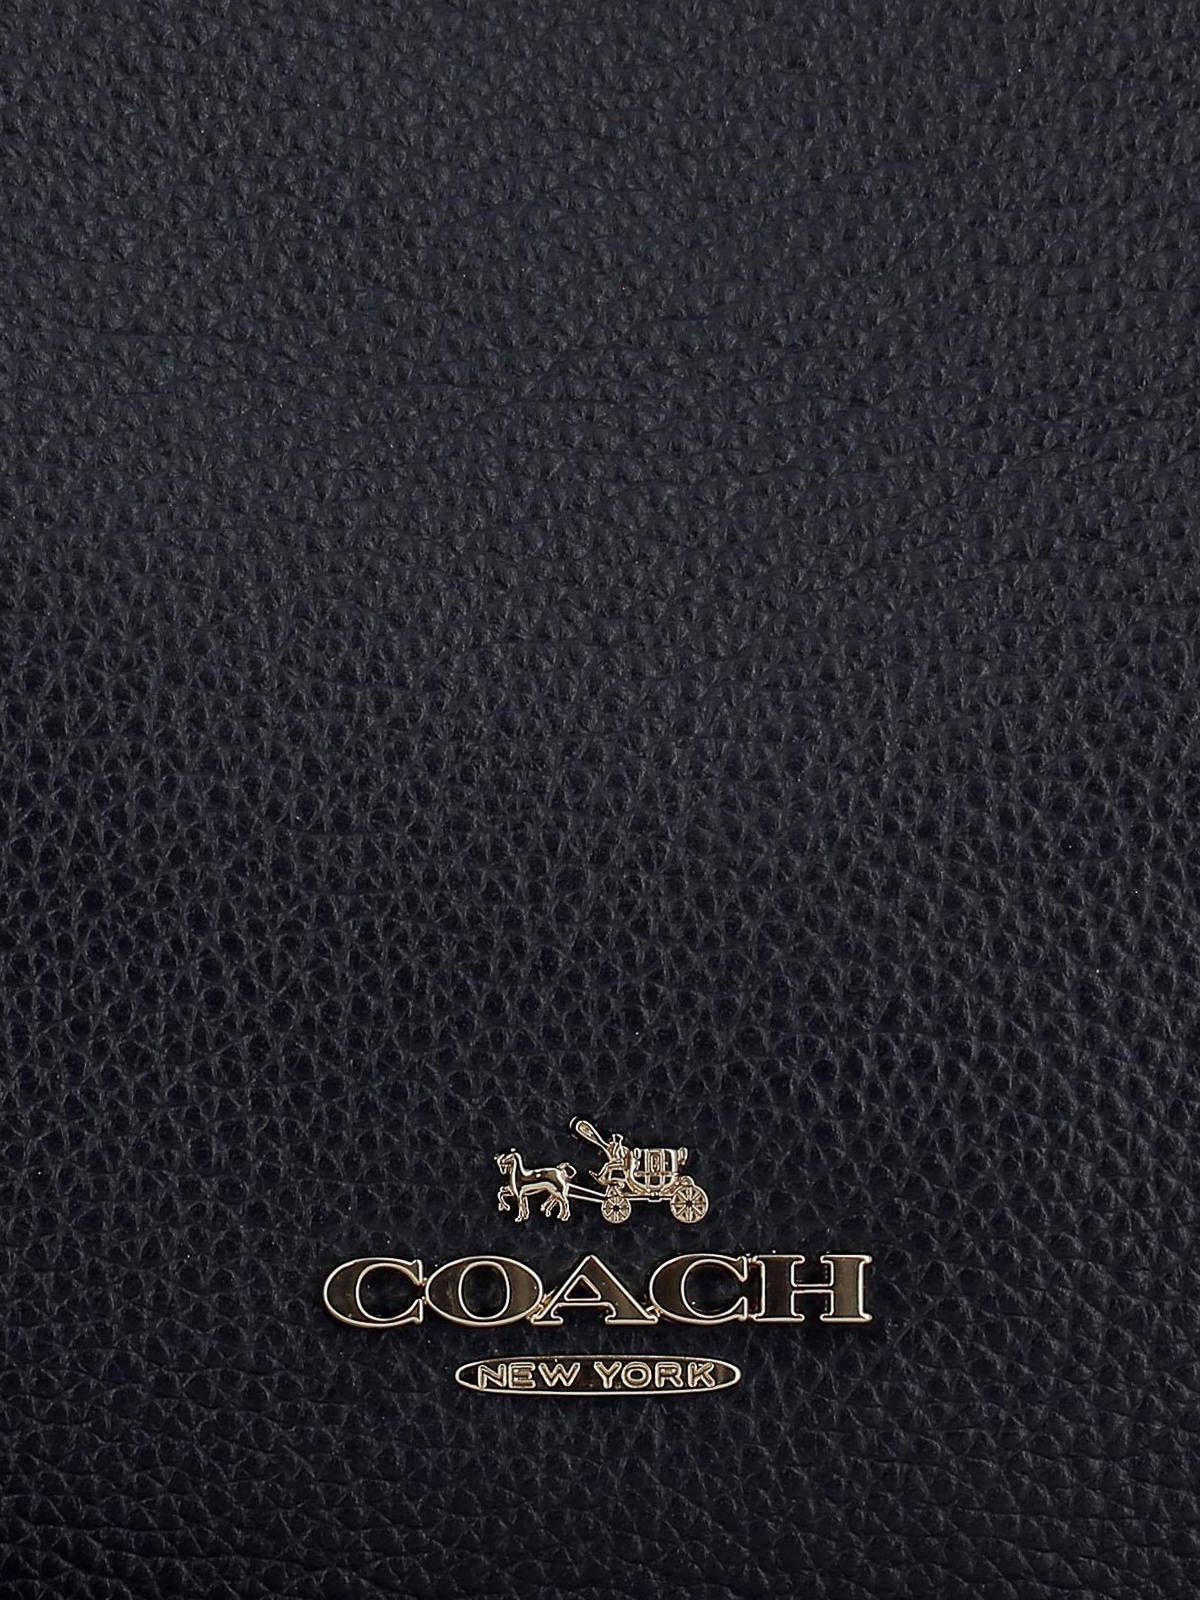 Coach 1200X1600 Wallpaper and Background Image